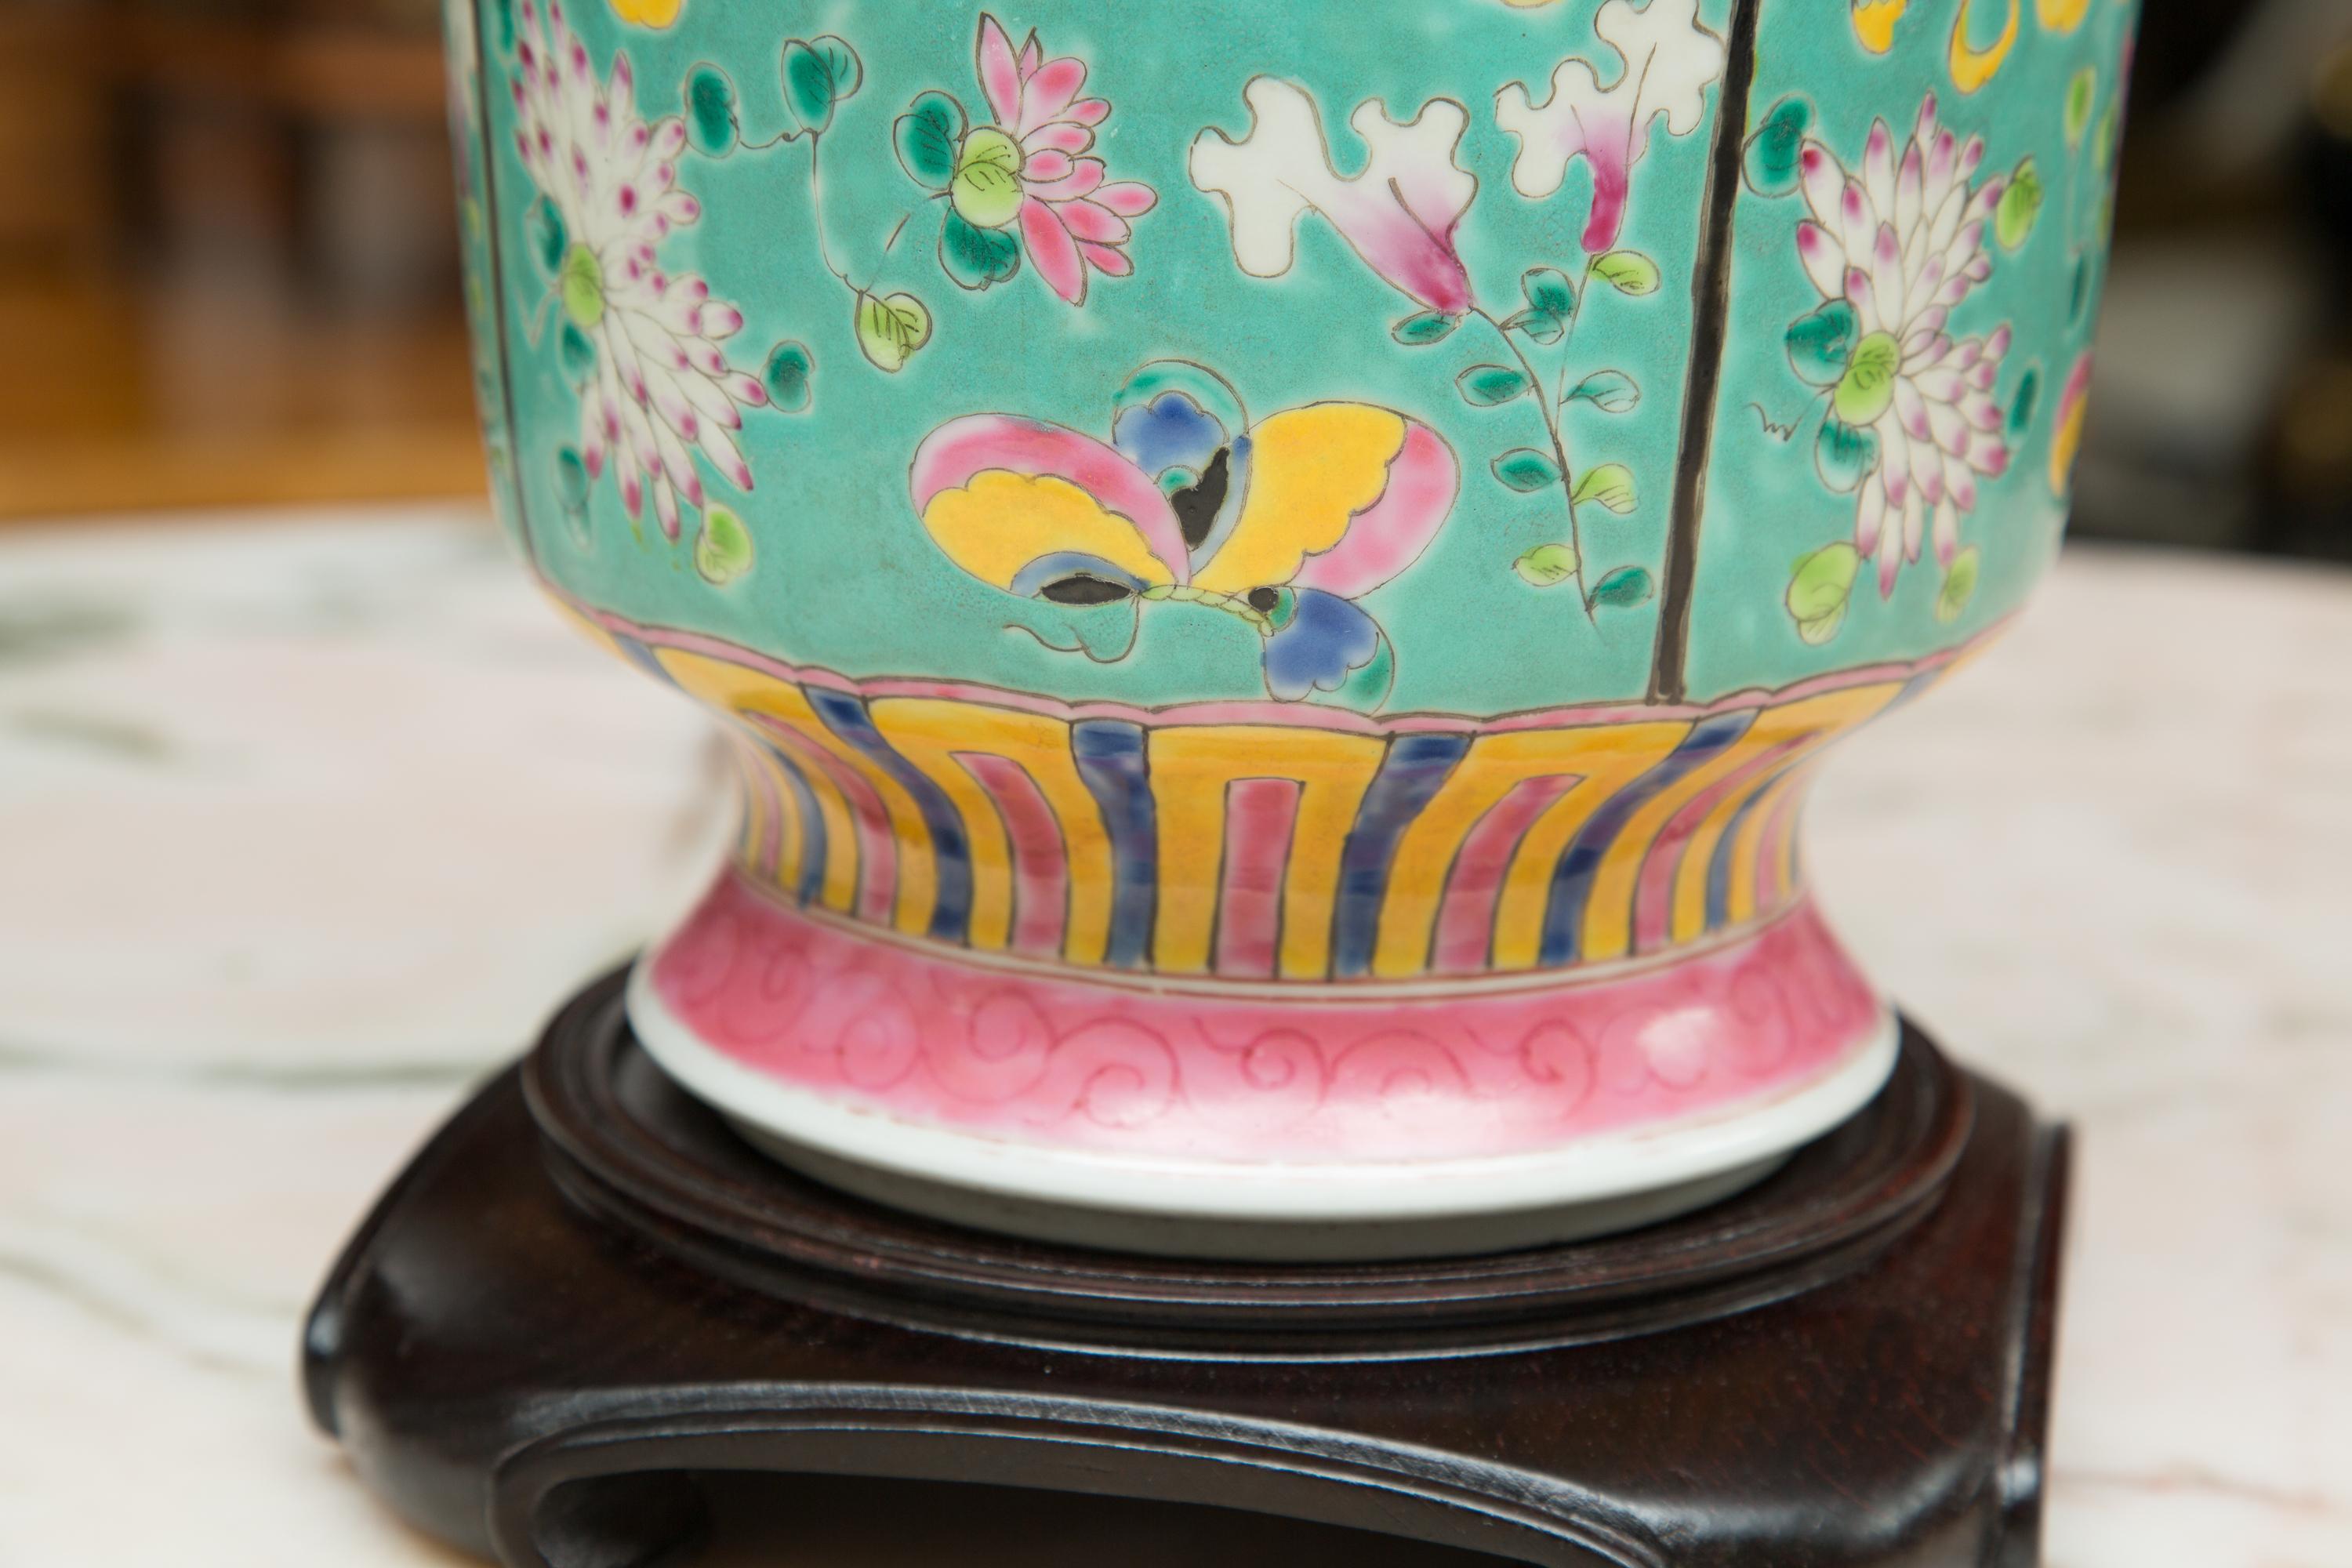 Beautifully hand painted vase with a turquoise background artfully decorated flowers and butterflies'.